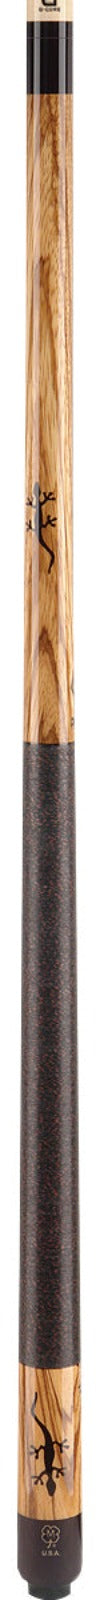 McDermott McDermott M54A Pool Cue with G-Core Shaft Pool Cue